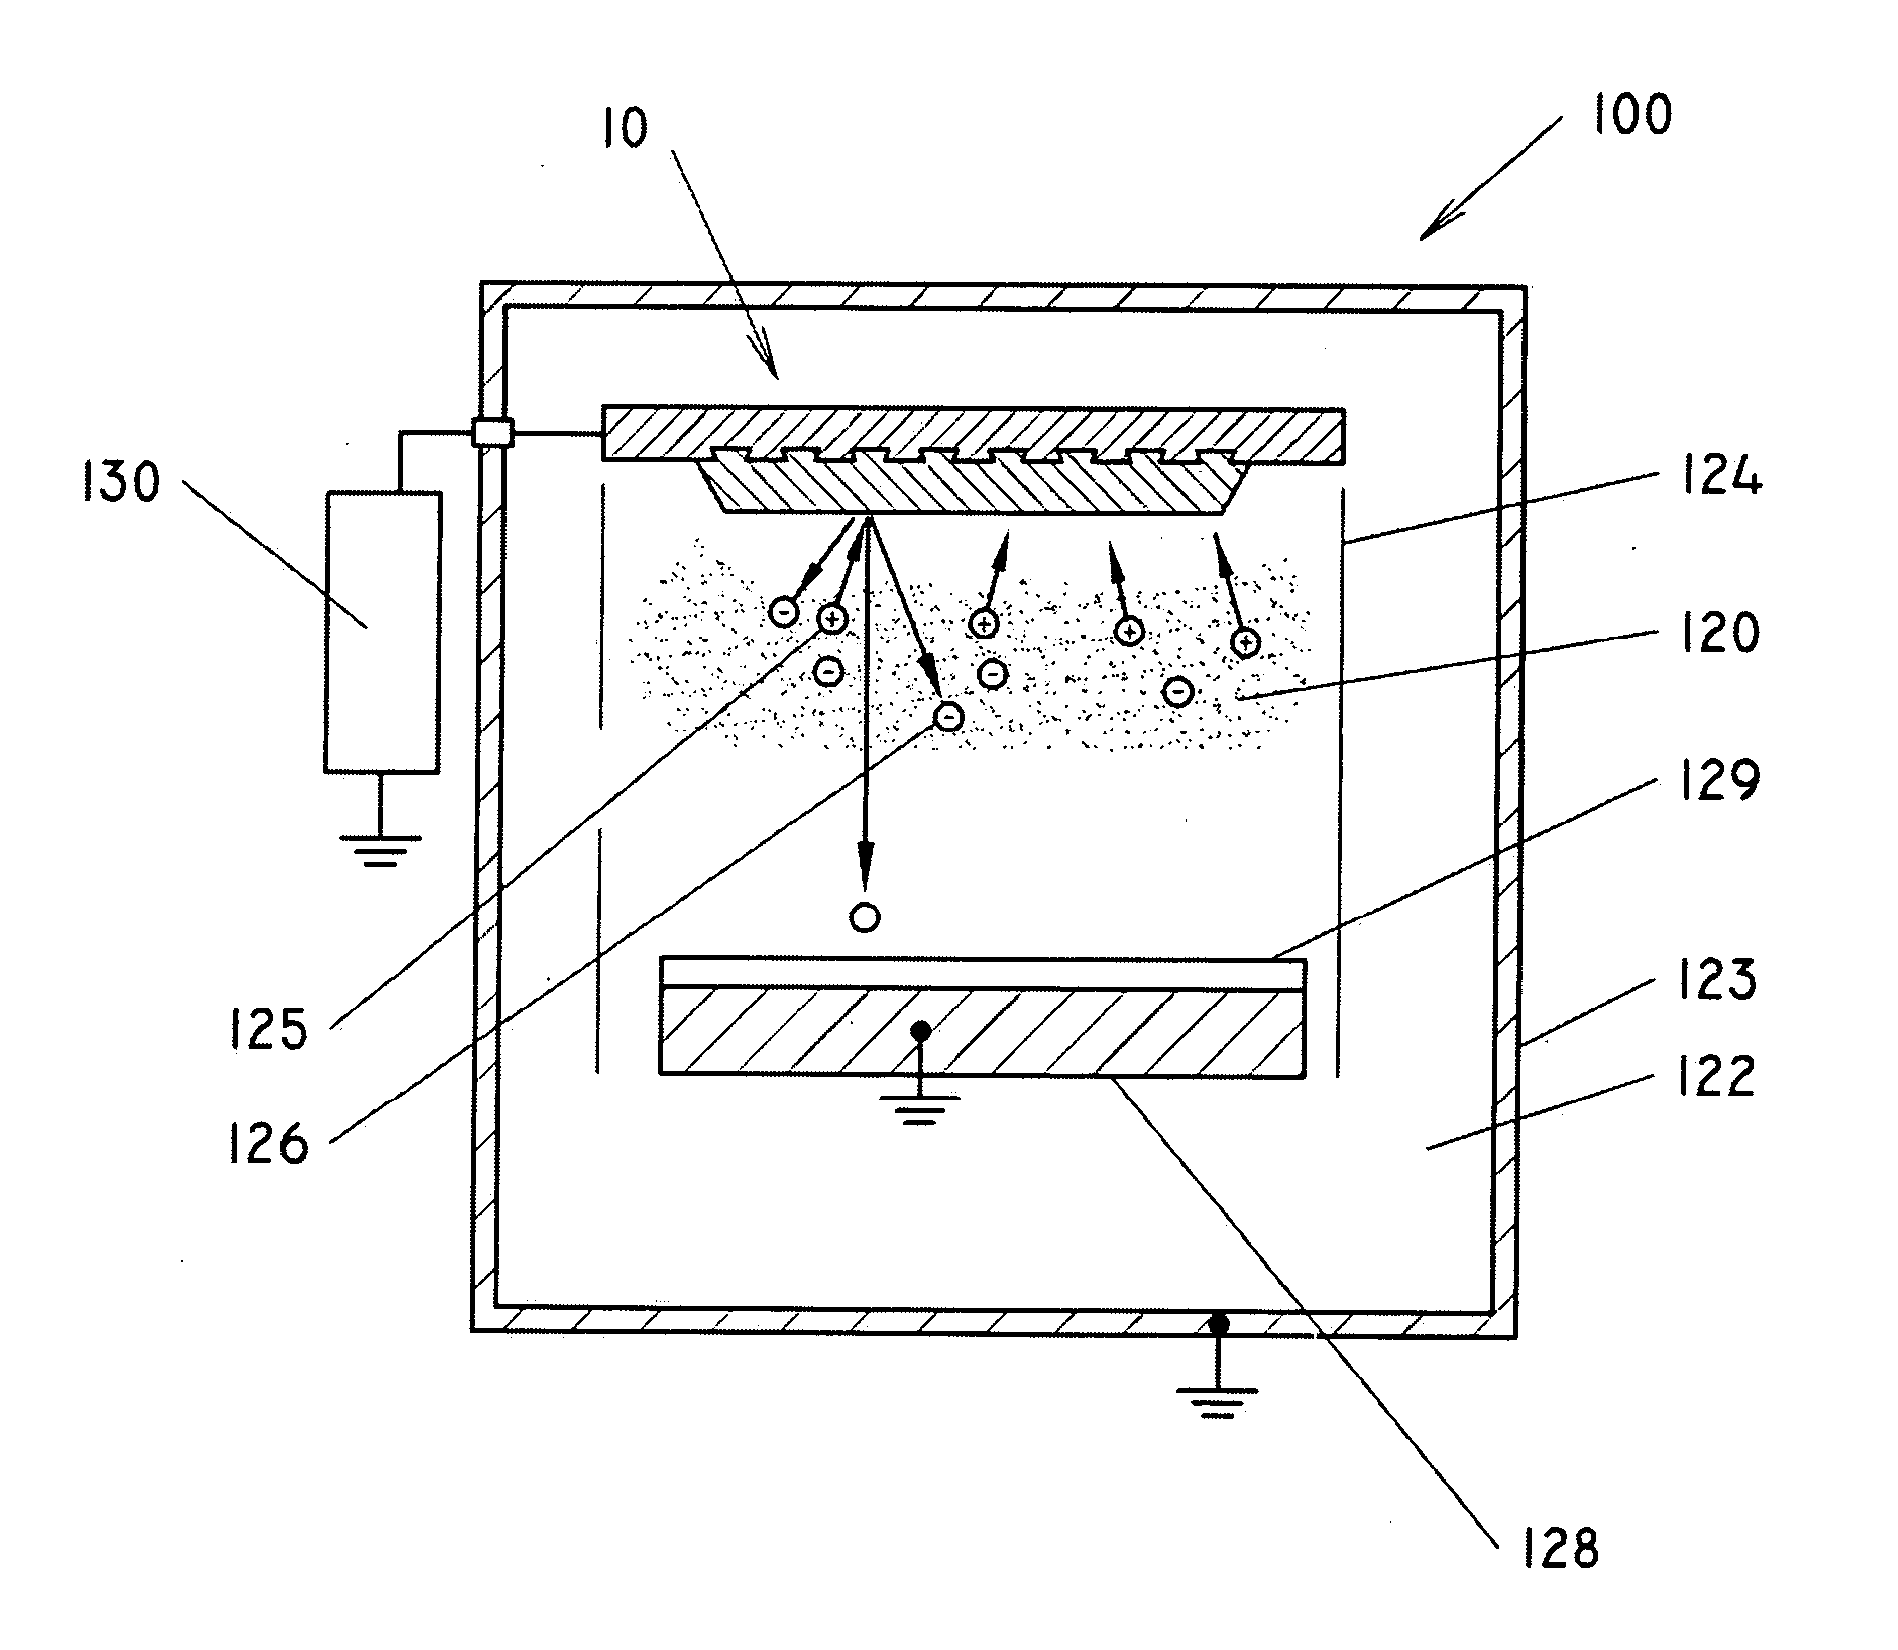 Copper Sputtering Target With Fine Grain Size And High Electromigration Resistance And Methods Of Making the Same